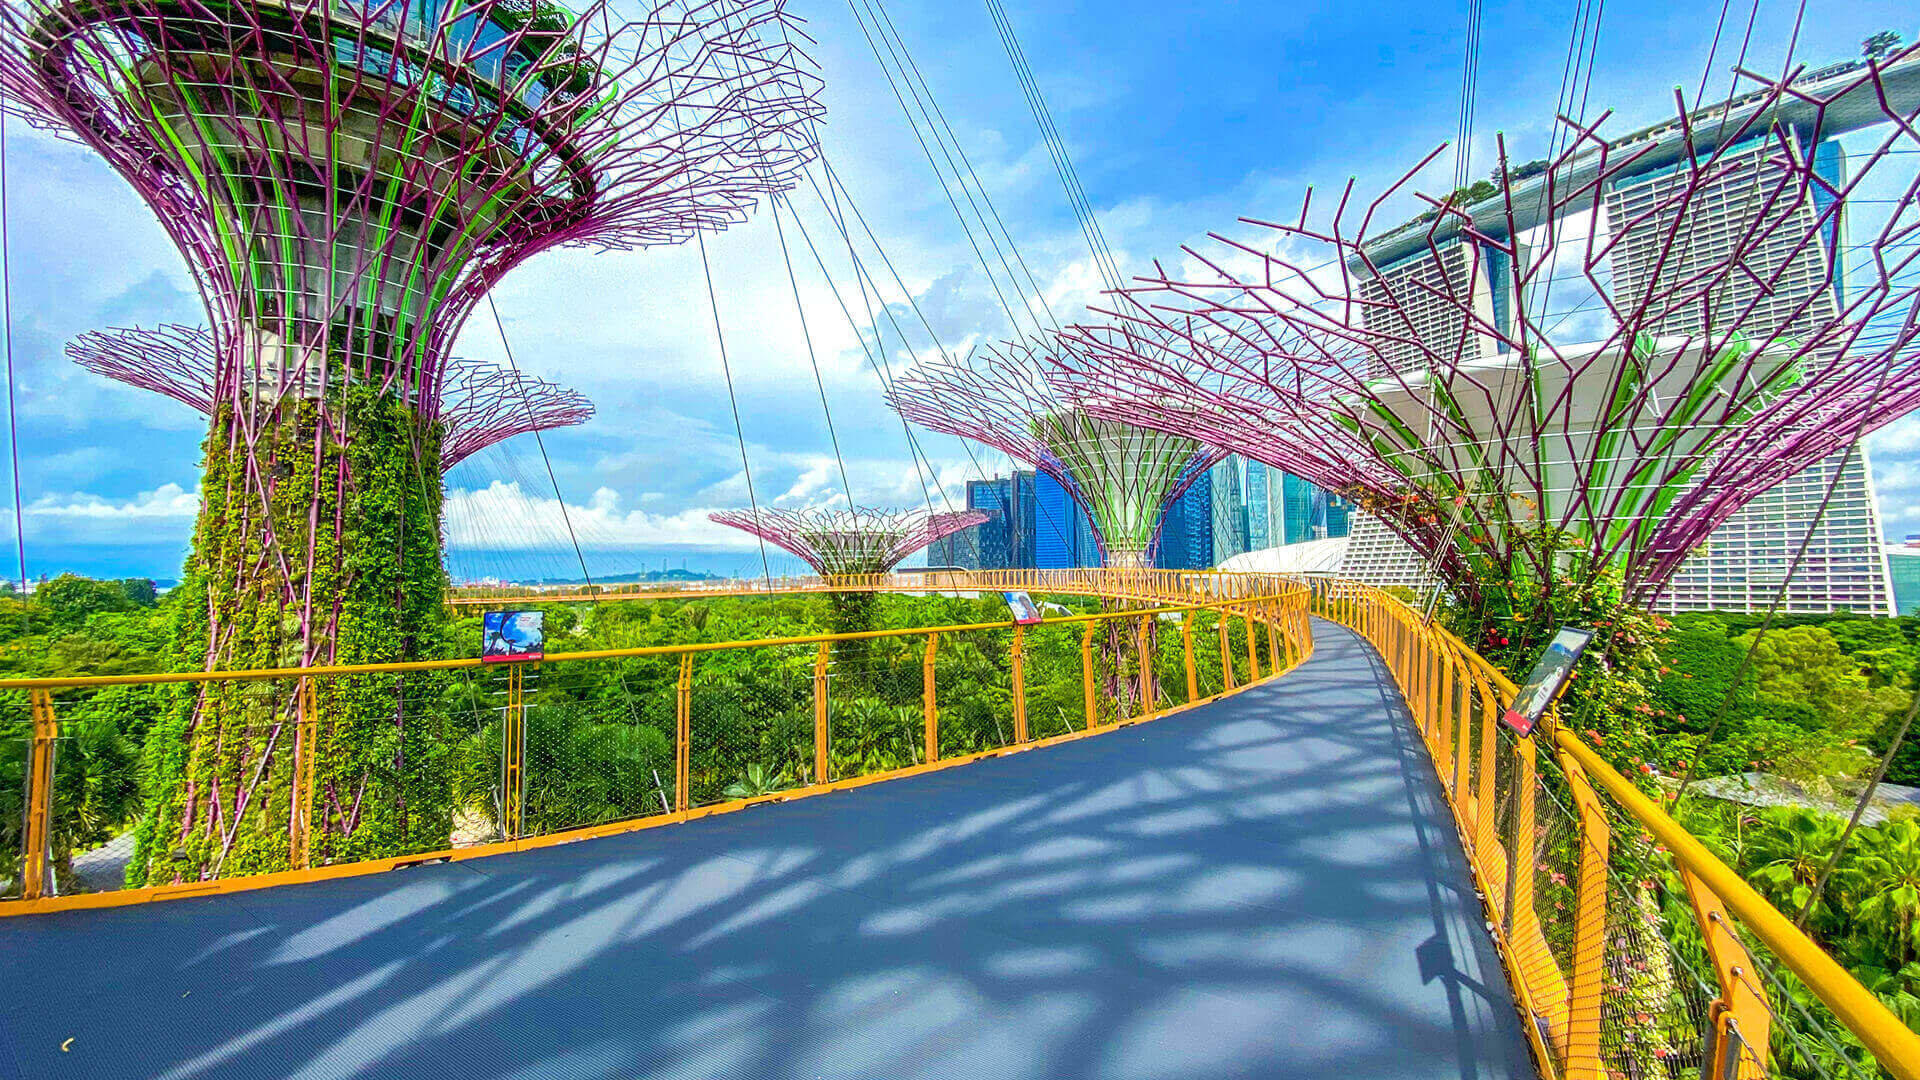 OCBC Skyway- Gardens By the Bay